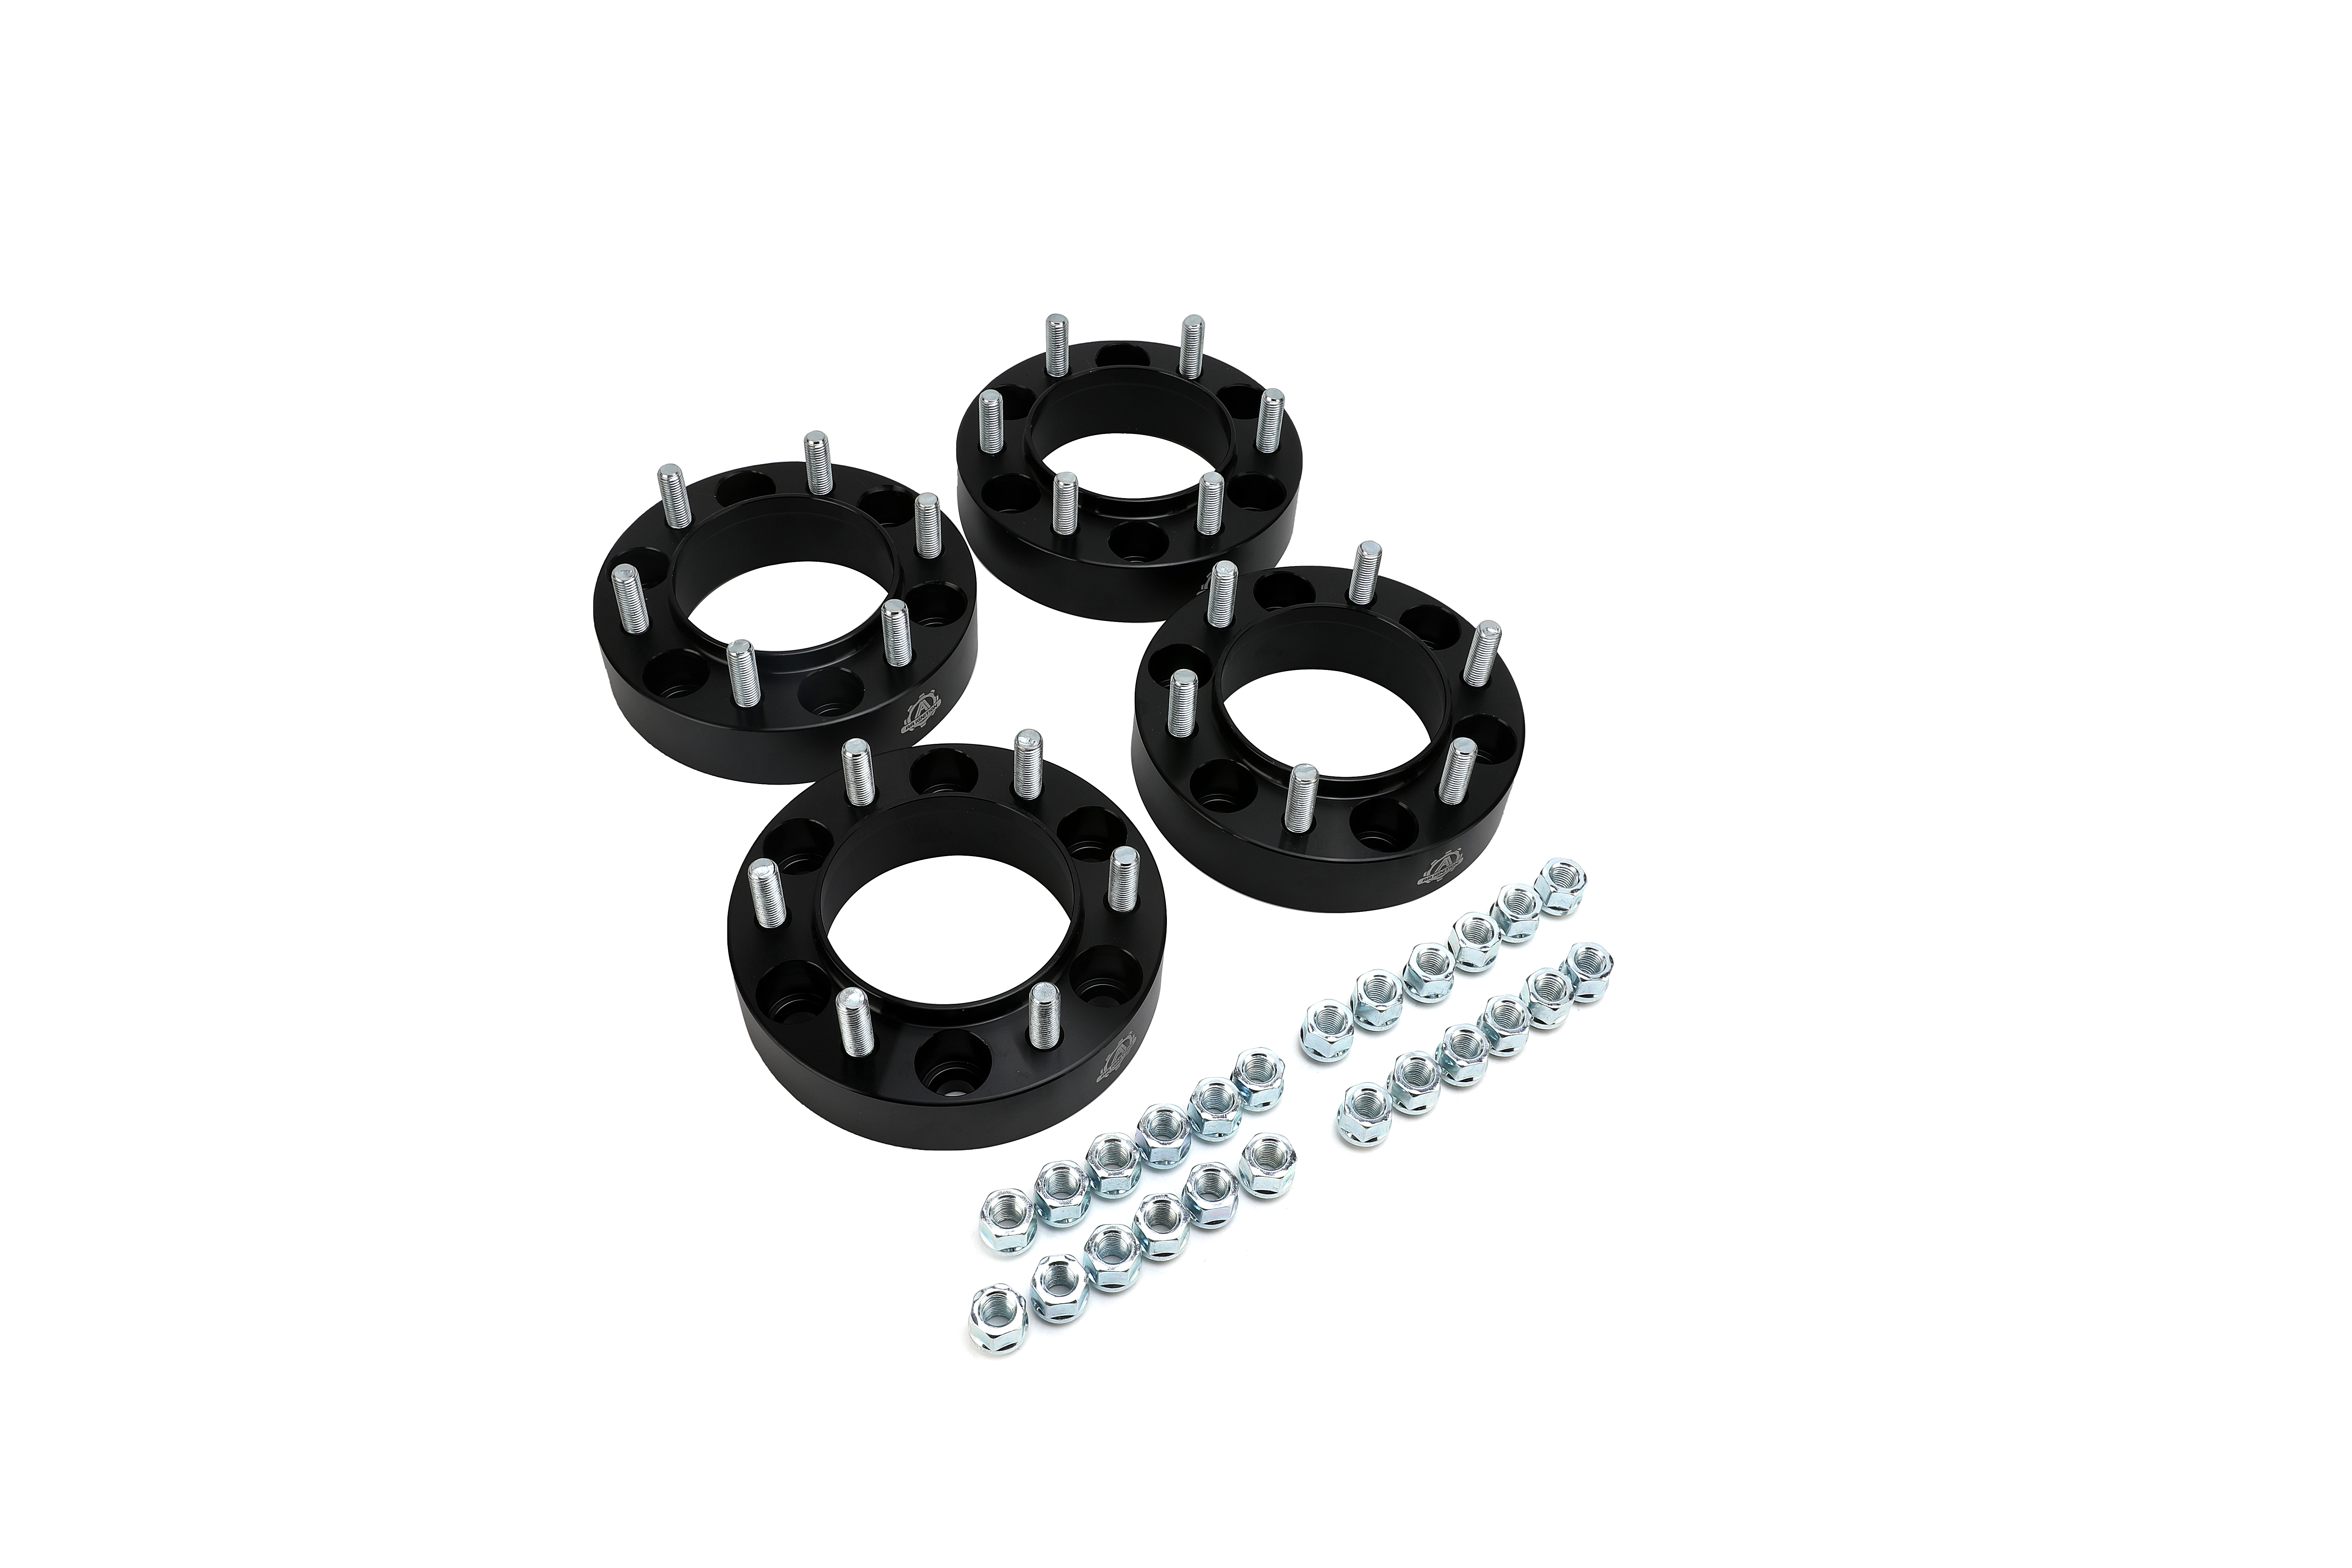 Wheel Spacer Set of 4 - 1.5 inch Thick 25mm Wheel Lug Centric 6x139.7mm - Fits Toyota Vehicles Image